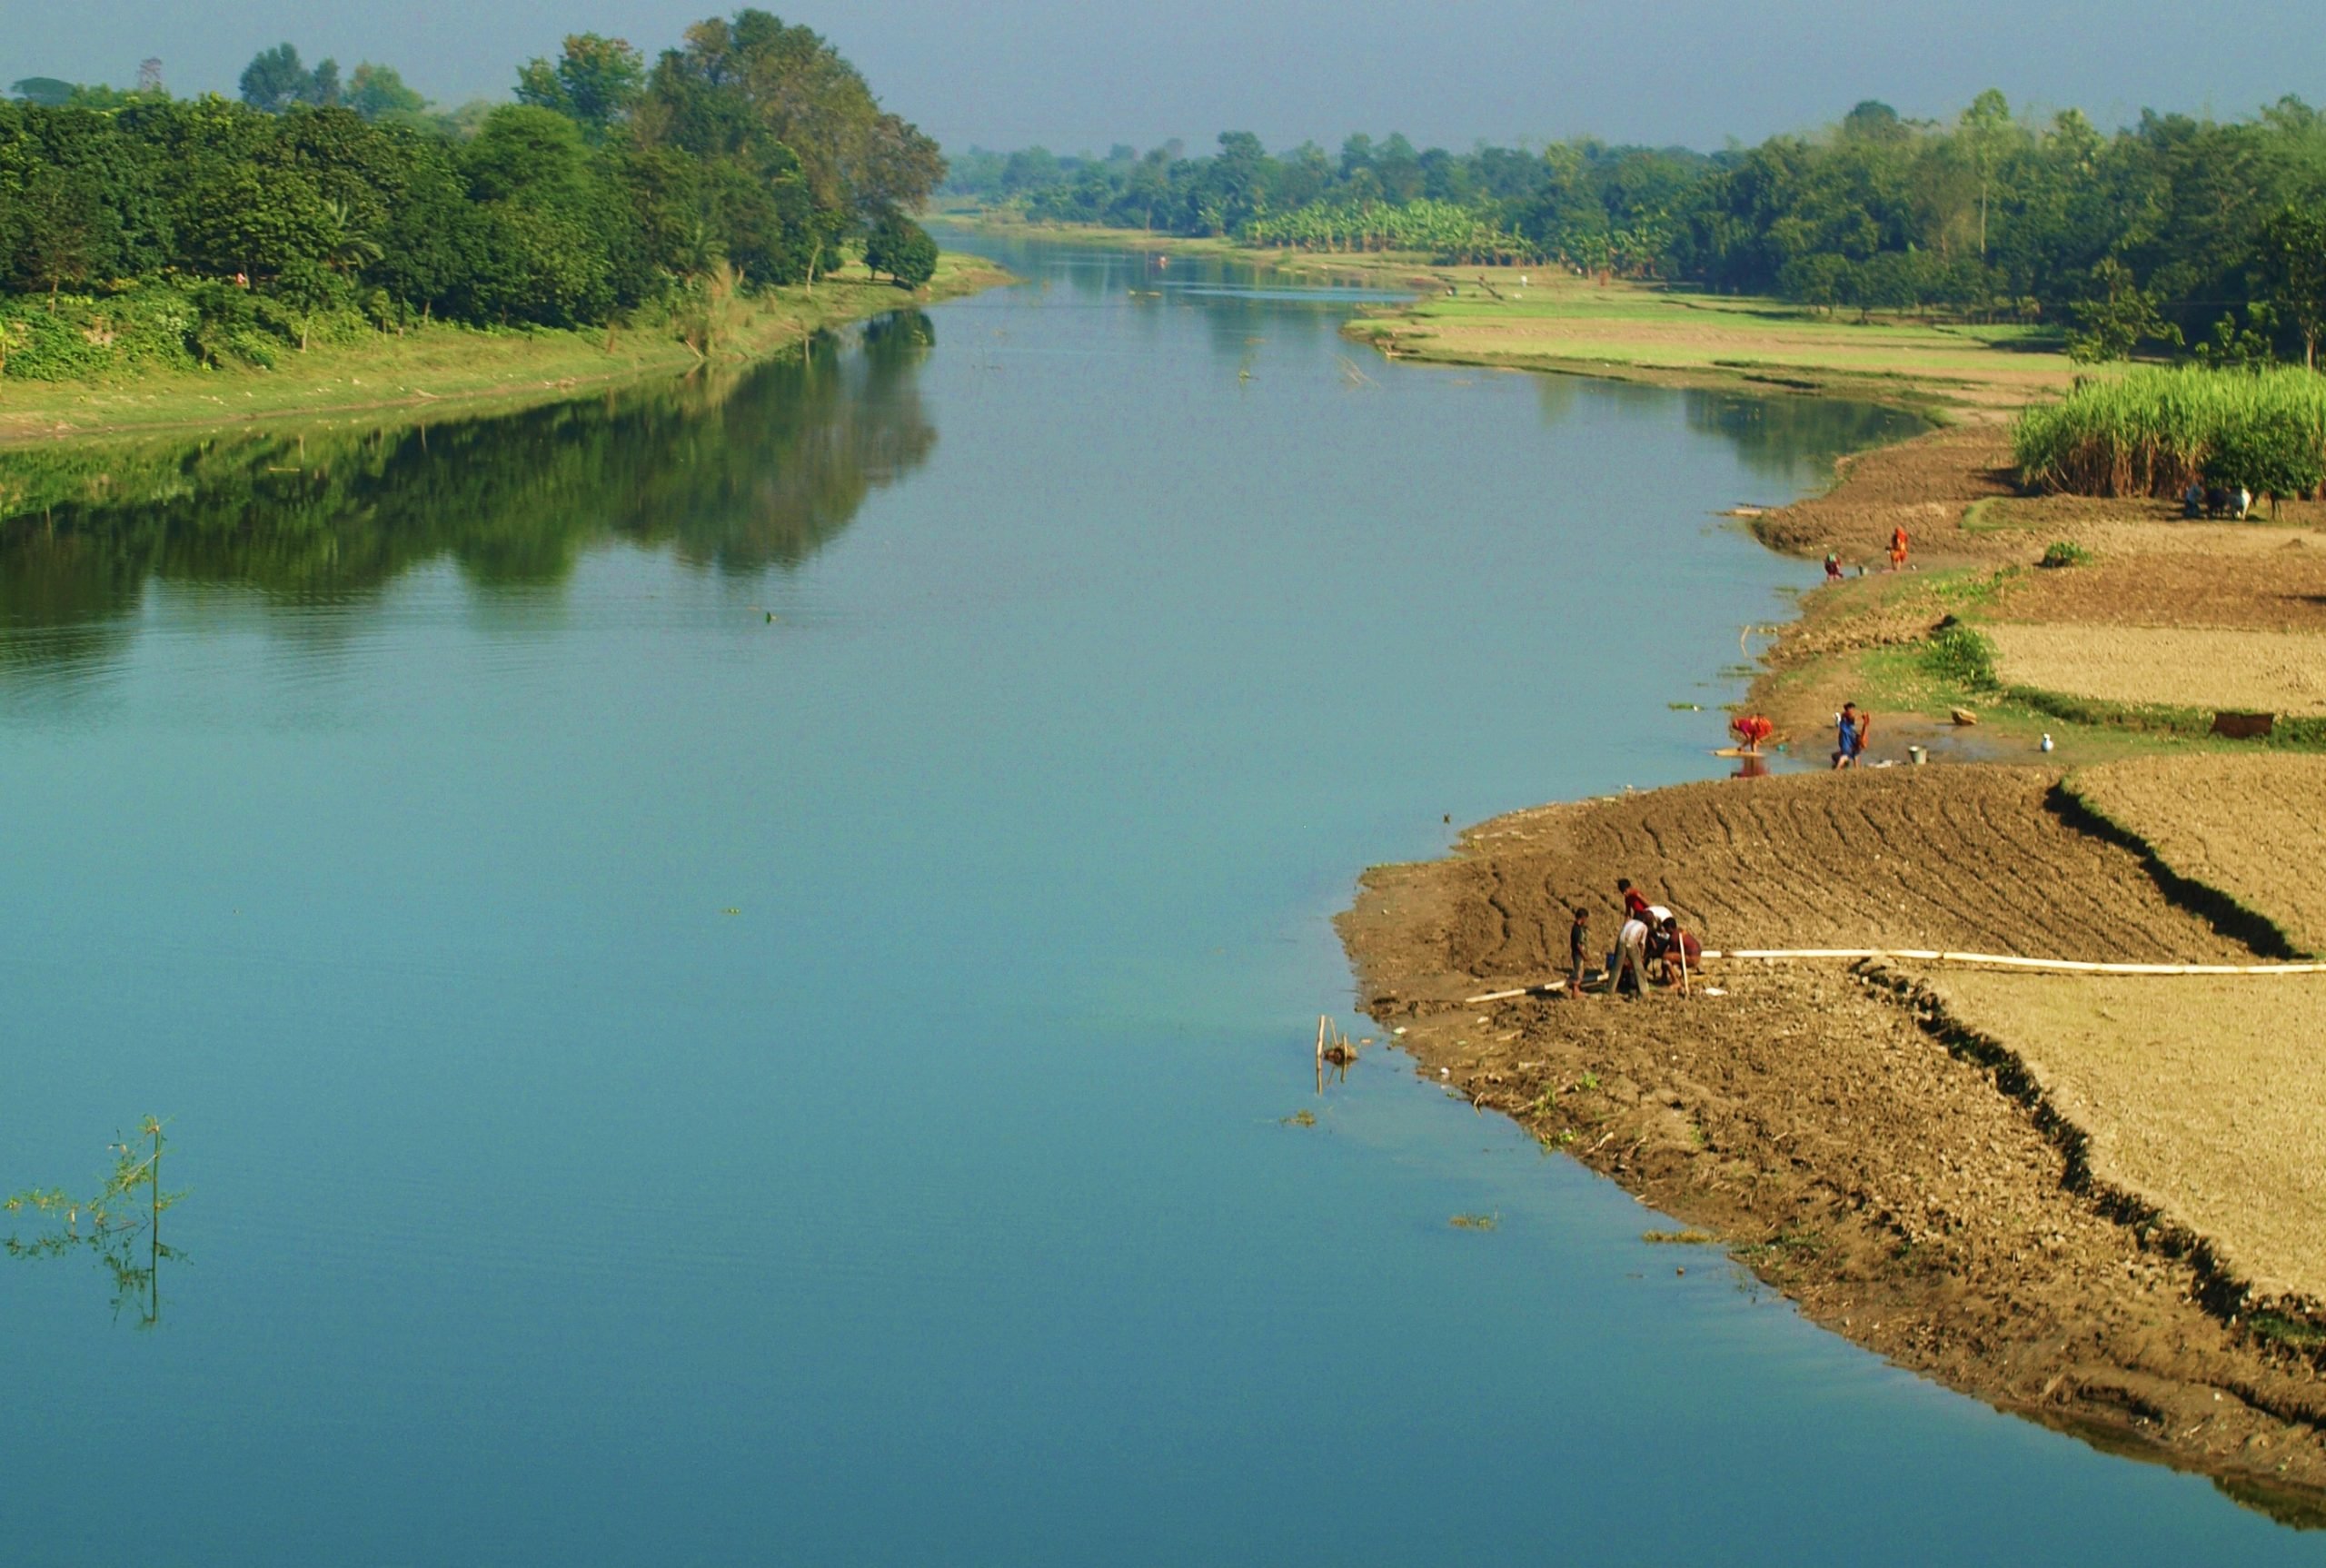 Restoring rivers like the Boral is a never ending task in Bangladesh